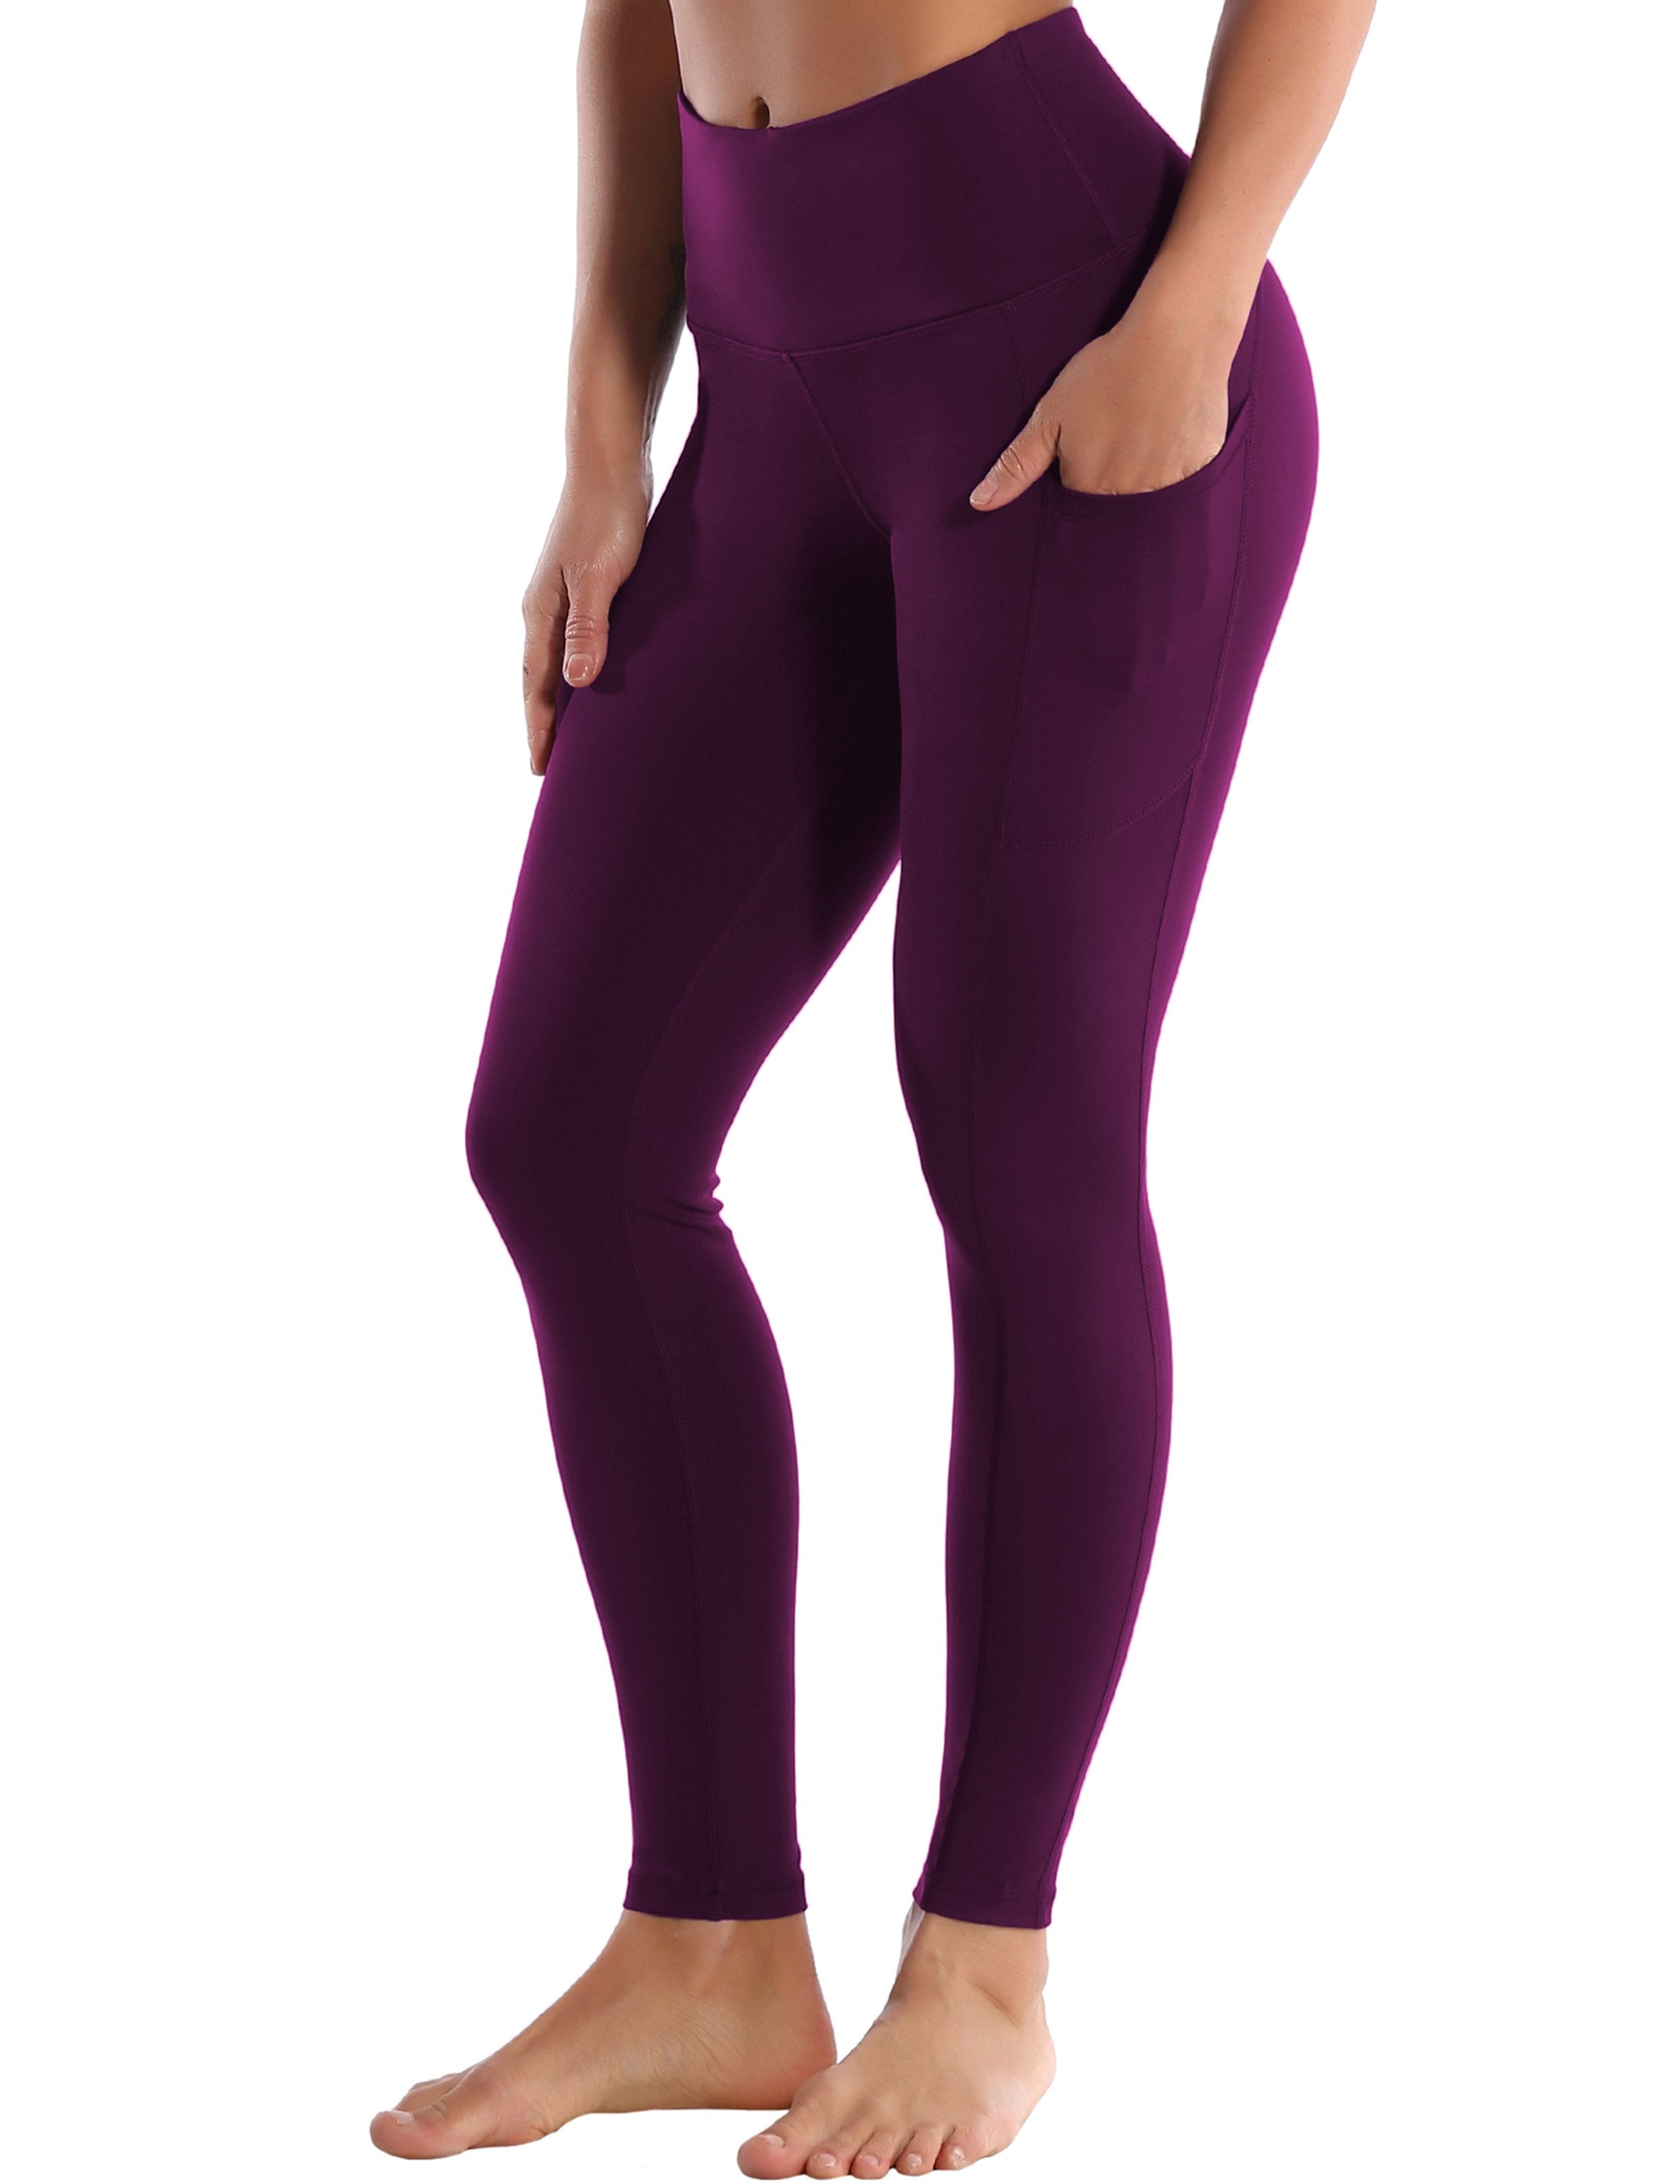 Hip Line Side Pockets Jogging Pants grapevine Sexy Hip Line Side Pockets 75%Nylon/25%Spandex Fabric doesn't attract lint easily 4-way stretch No see-through Moisture-wicking Tummy control Inner pocket Two lengths